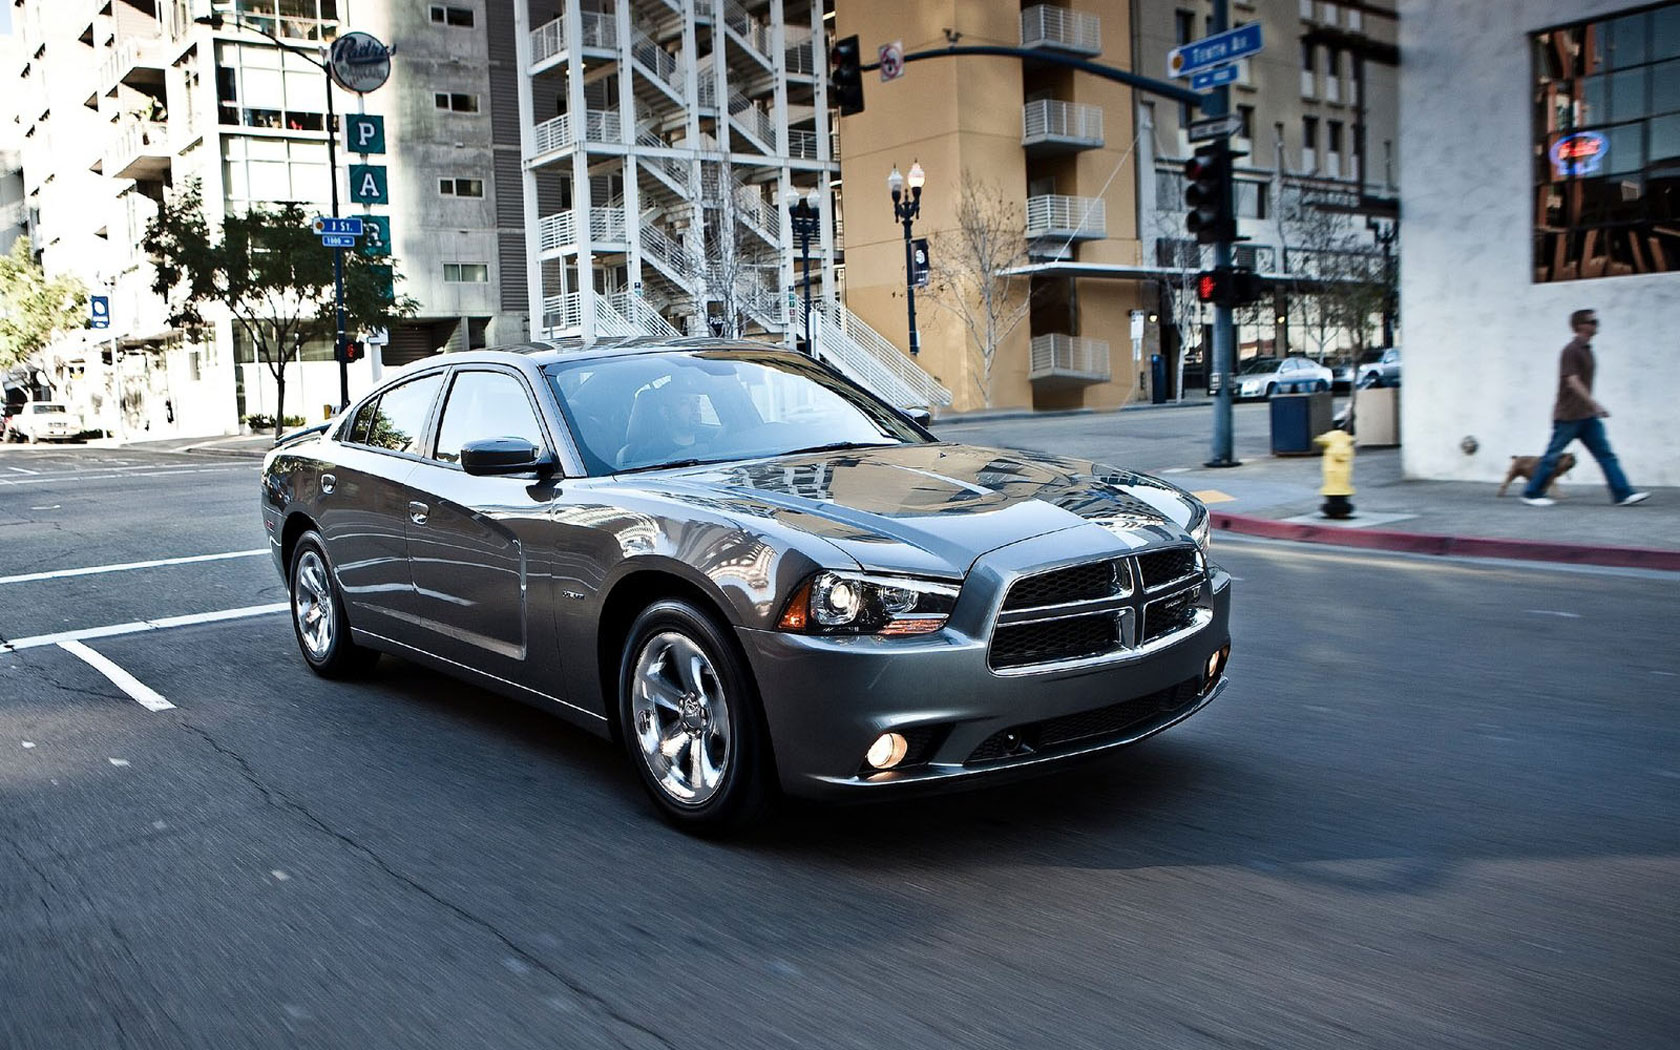  Dodge Charger (2011-2015)